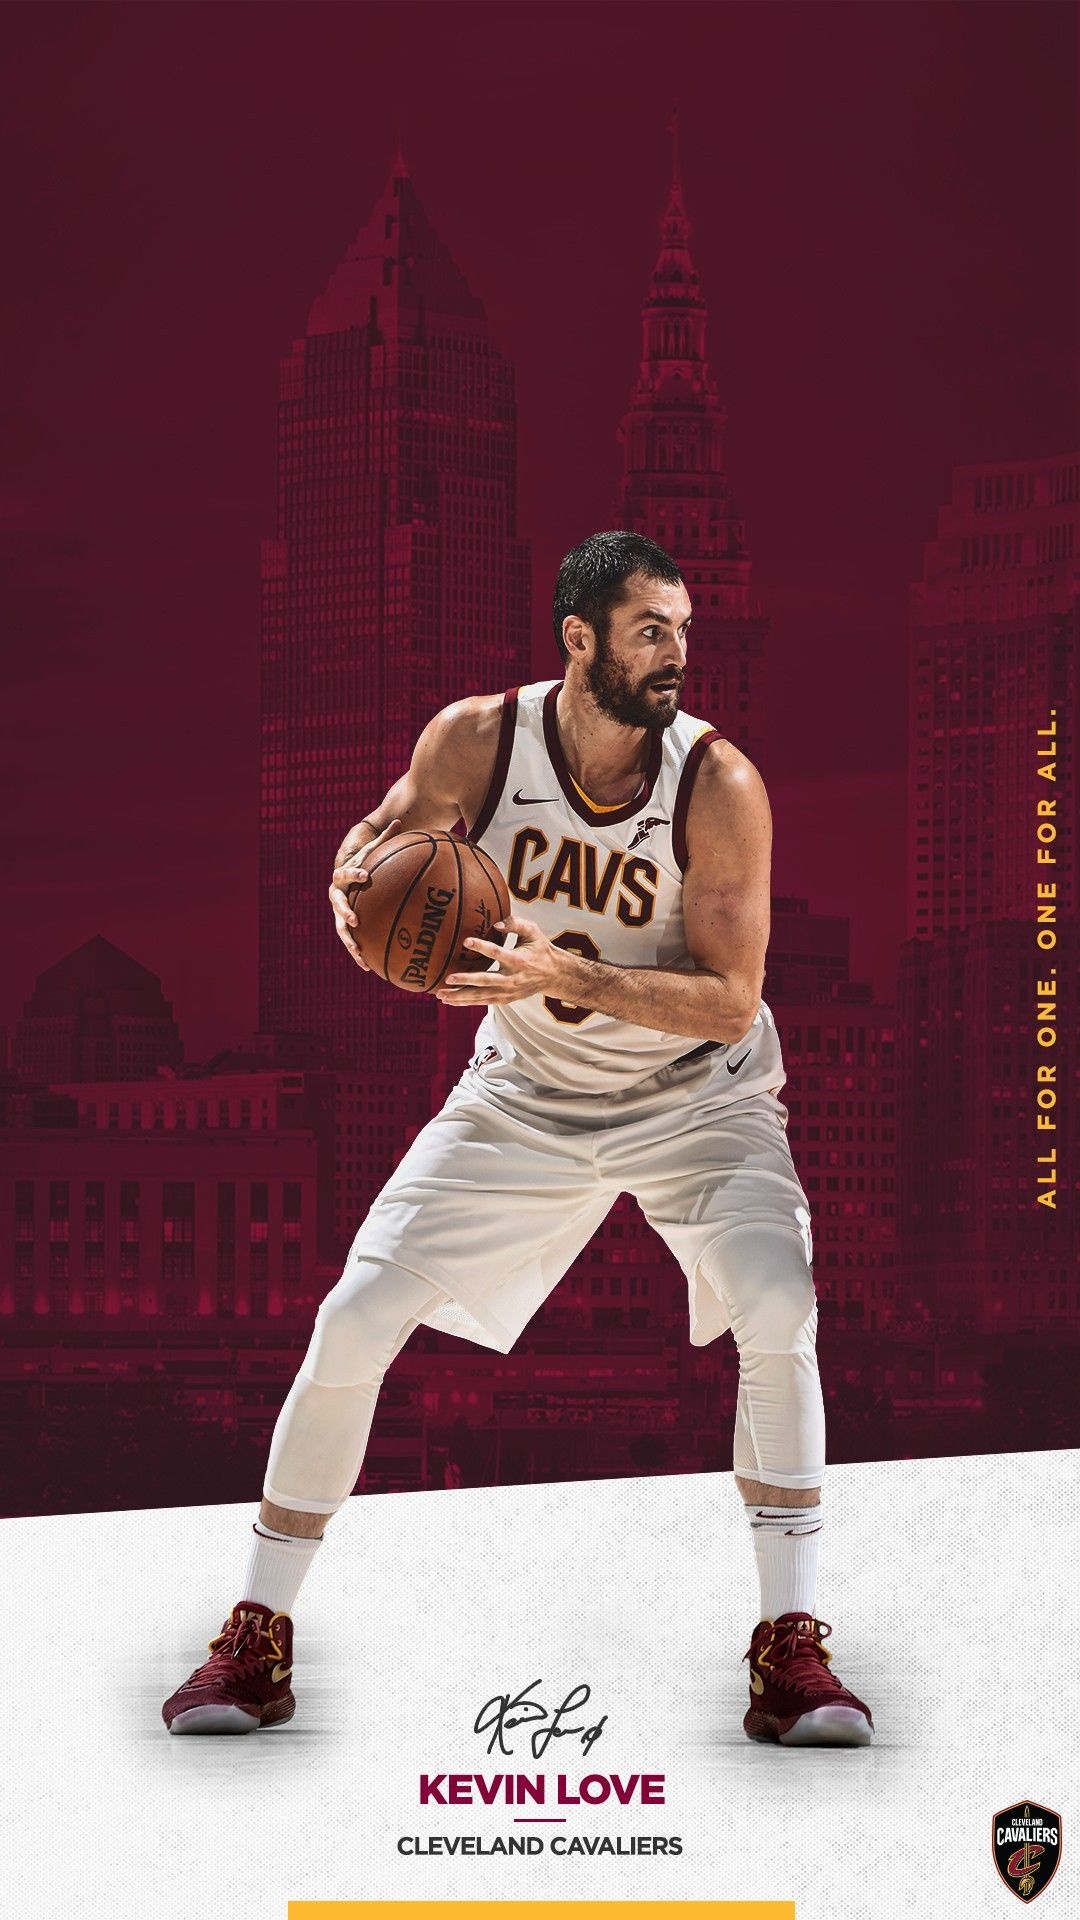 Cleveland Cavaliers: Kevin Love, The team lost the 2009 Eastern Conference Finals to the Orlando Magic. 1080x1920 Full HD Background.